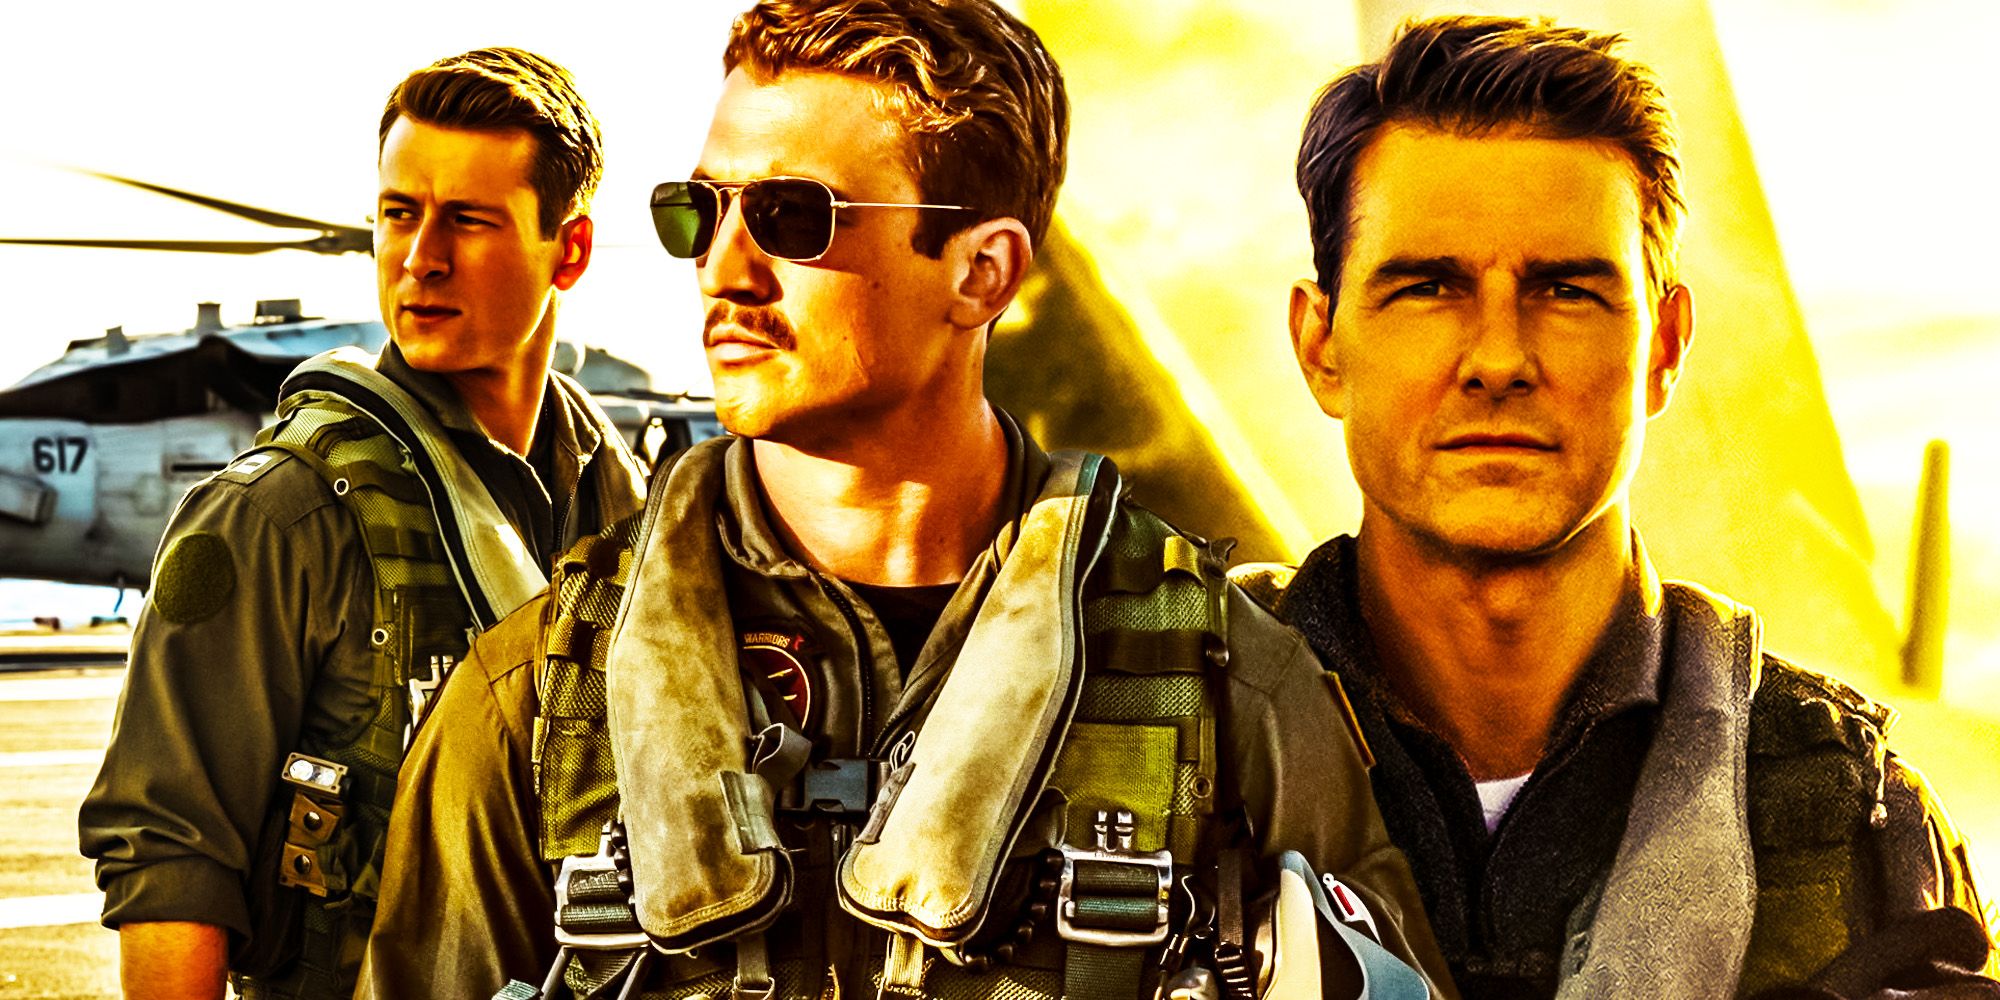 Top Gun 2 Reunion Post Has None Of Rooster & Hangman's On-Screen Rivalry